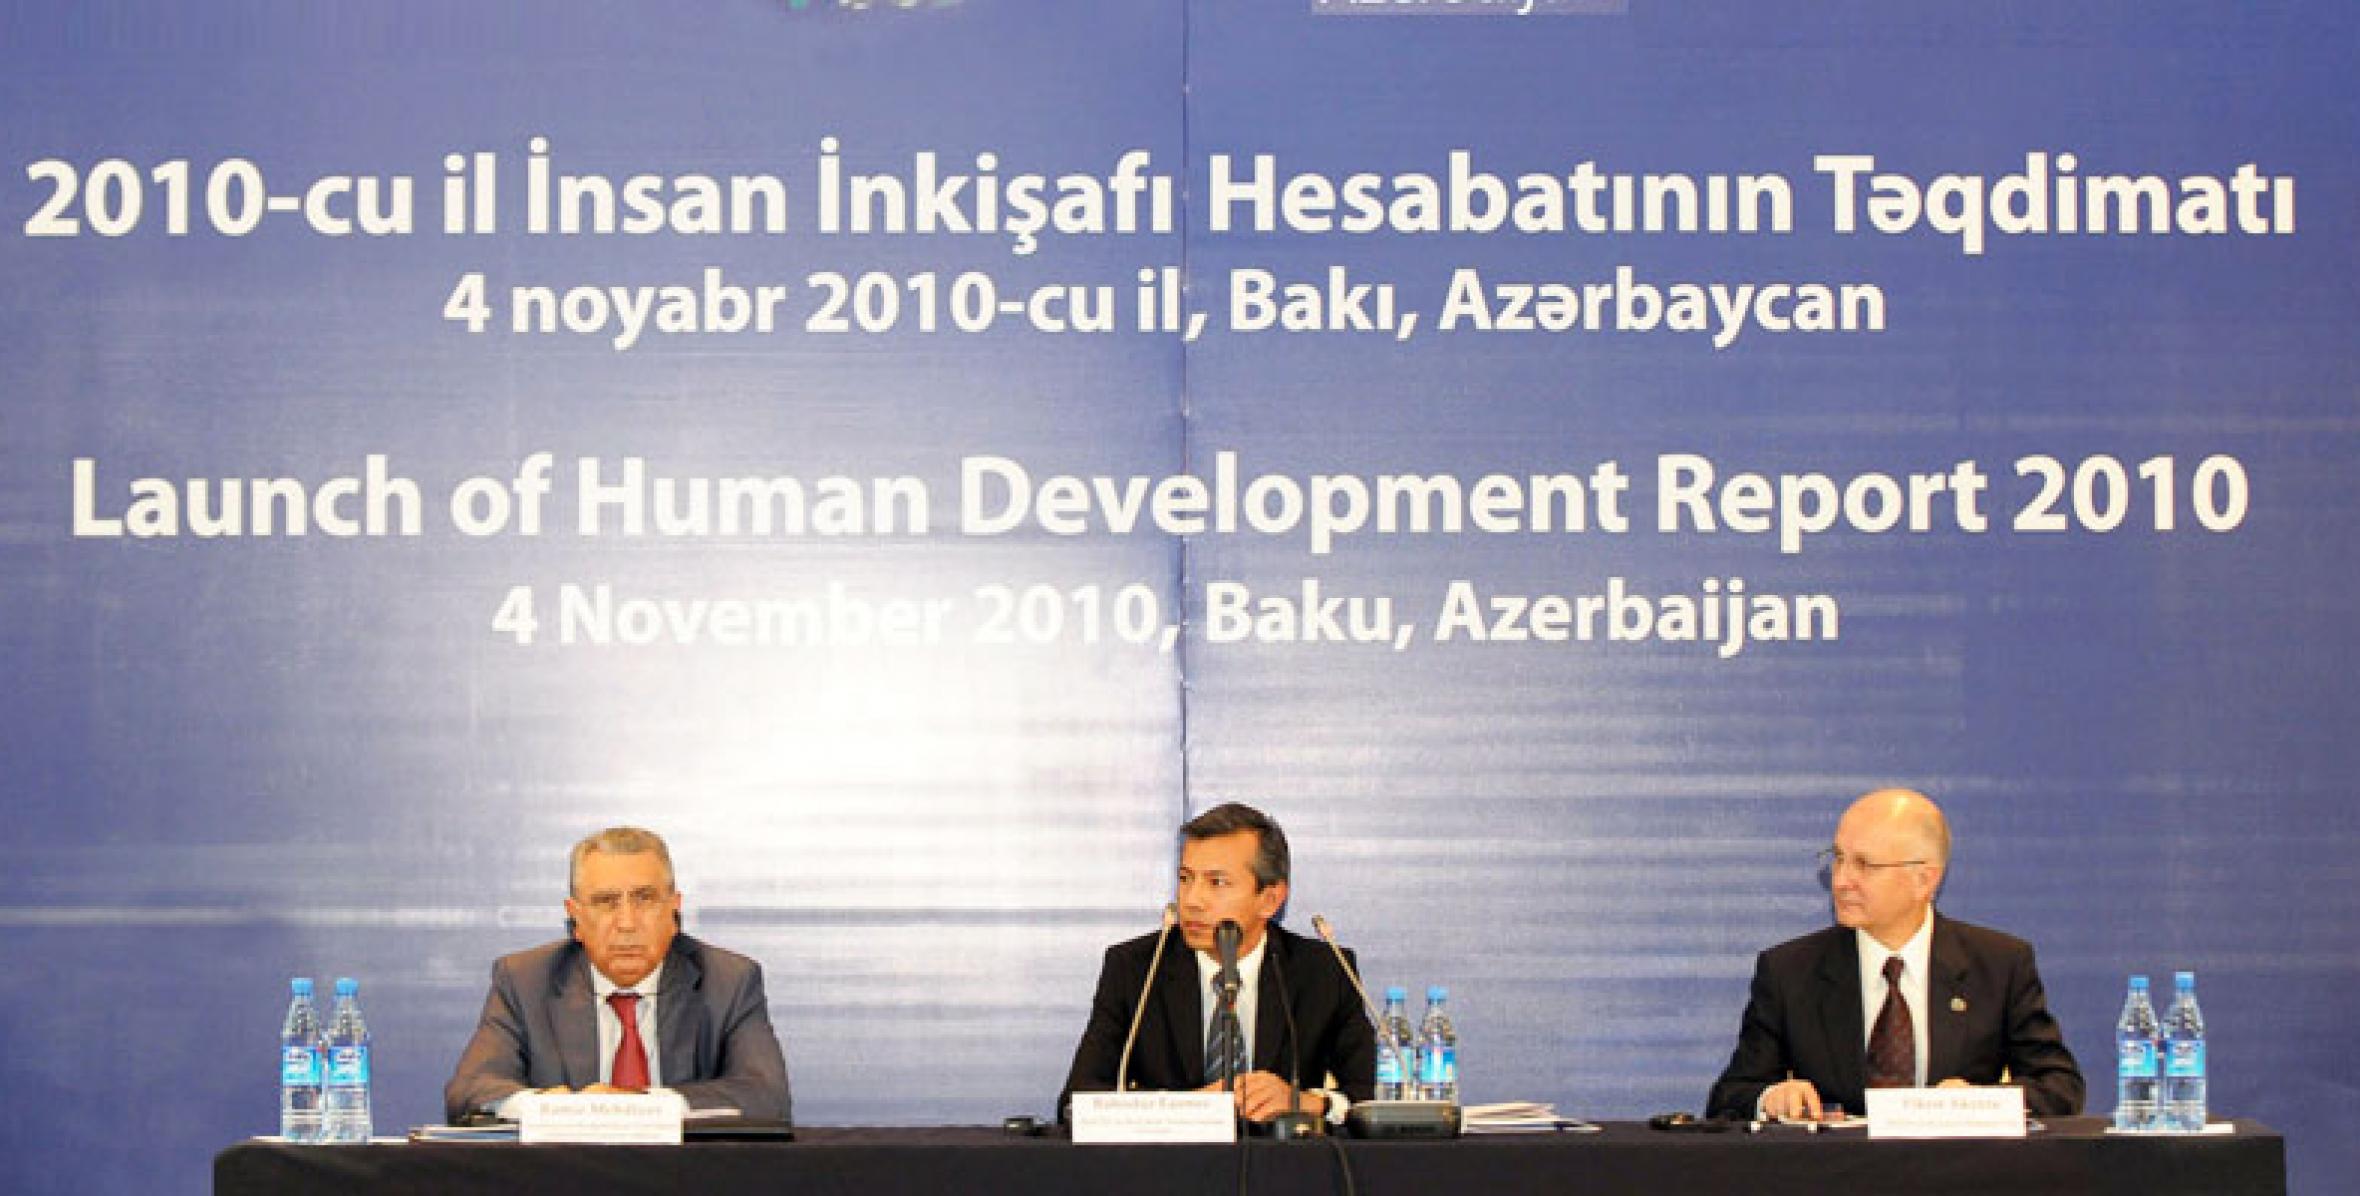 Chief of Staff of the Presidential Administration attended the launch of Human Development Report 2010 of the United Nations Development Program